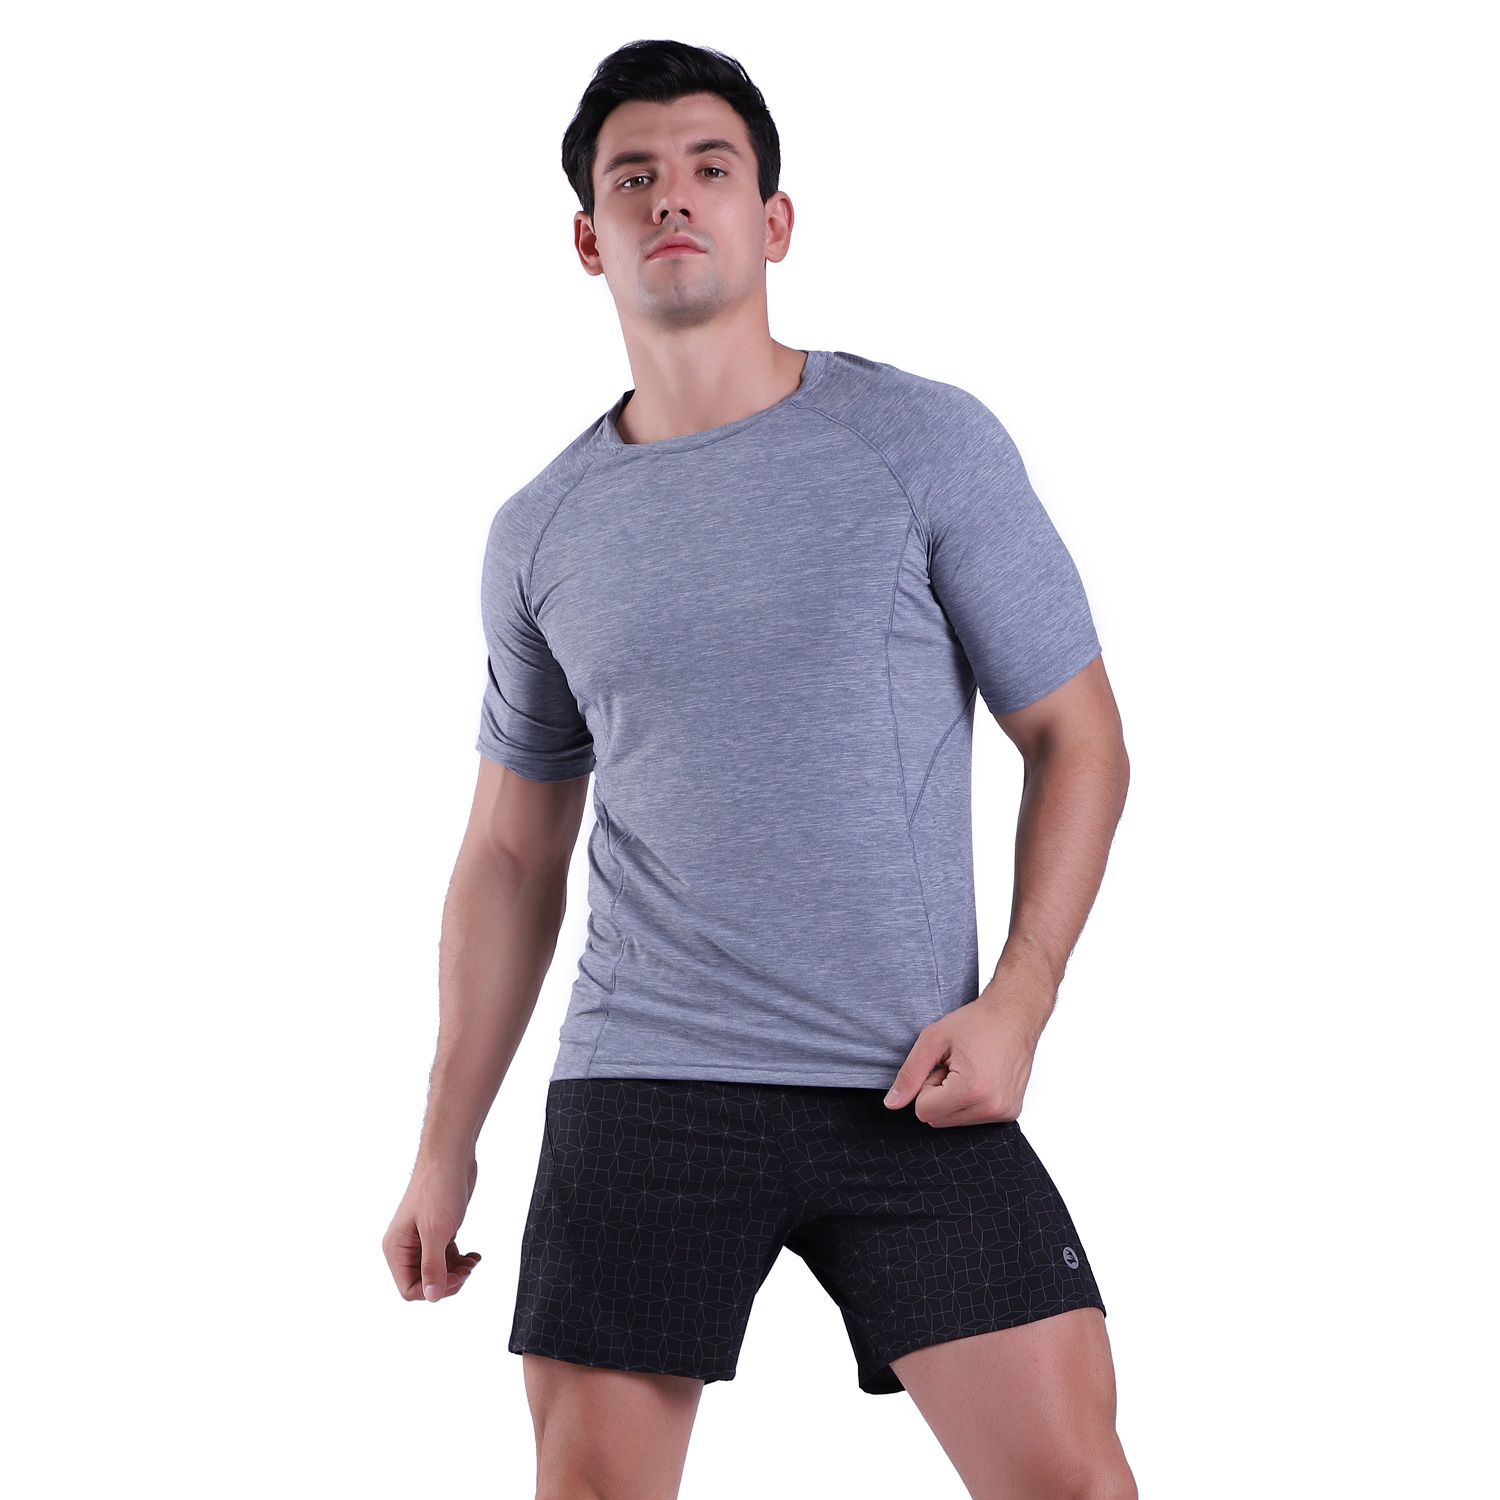 Men's Quick Dry Short Sleeve T- Shirt Breathable Running Workout Tee Shirts Cowl Neck Top